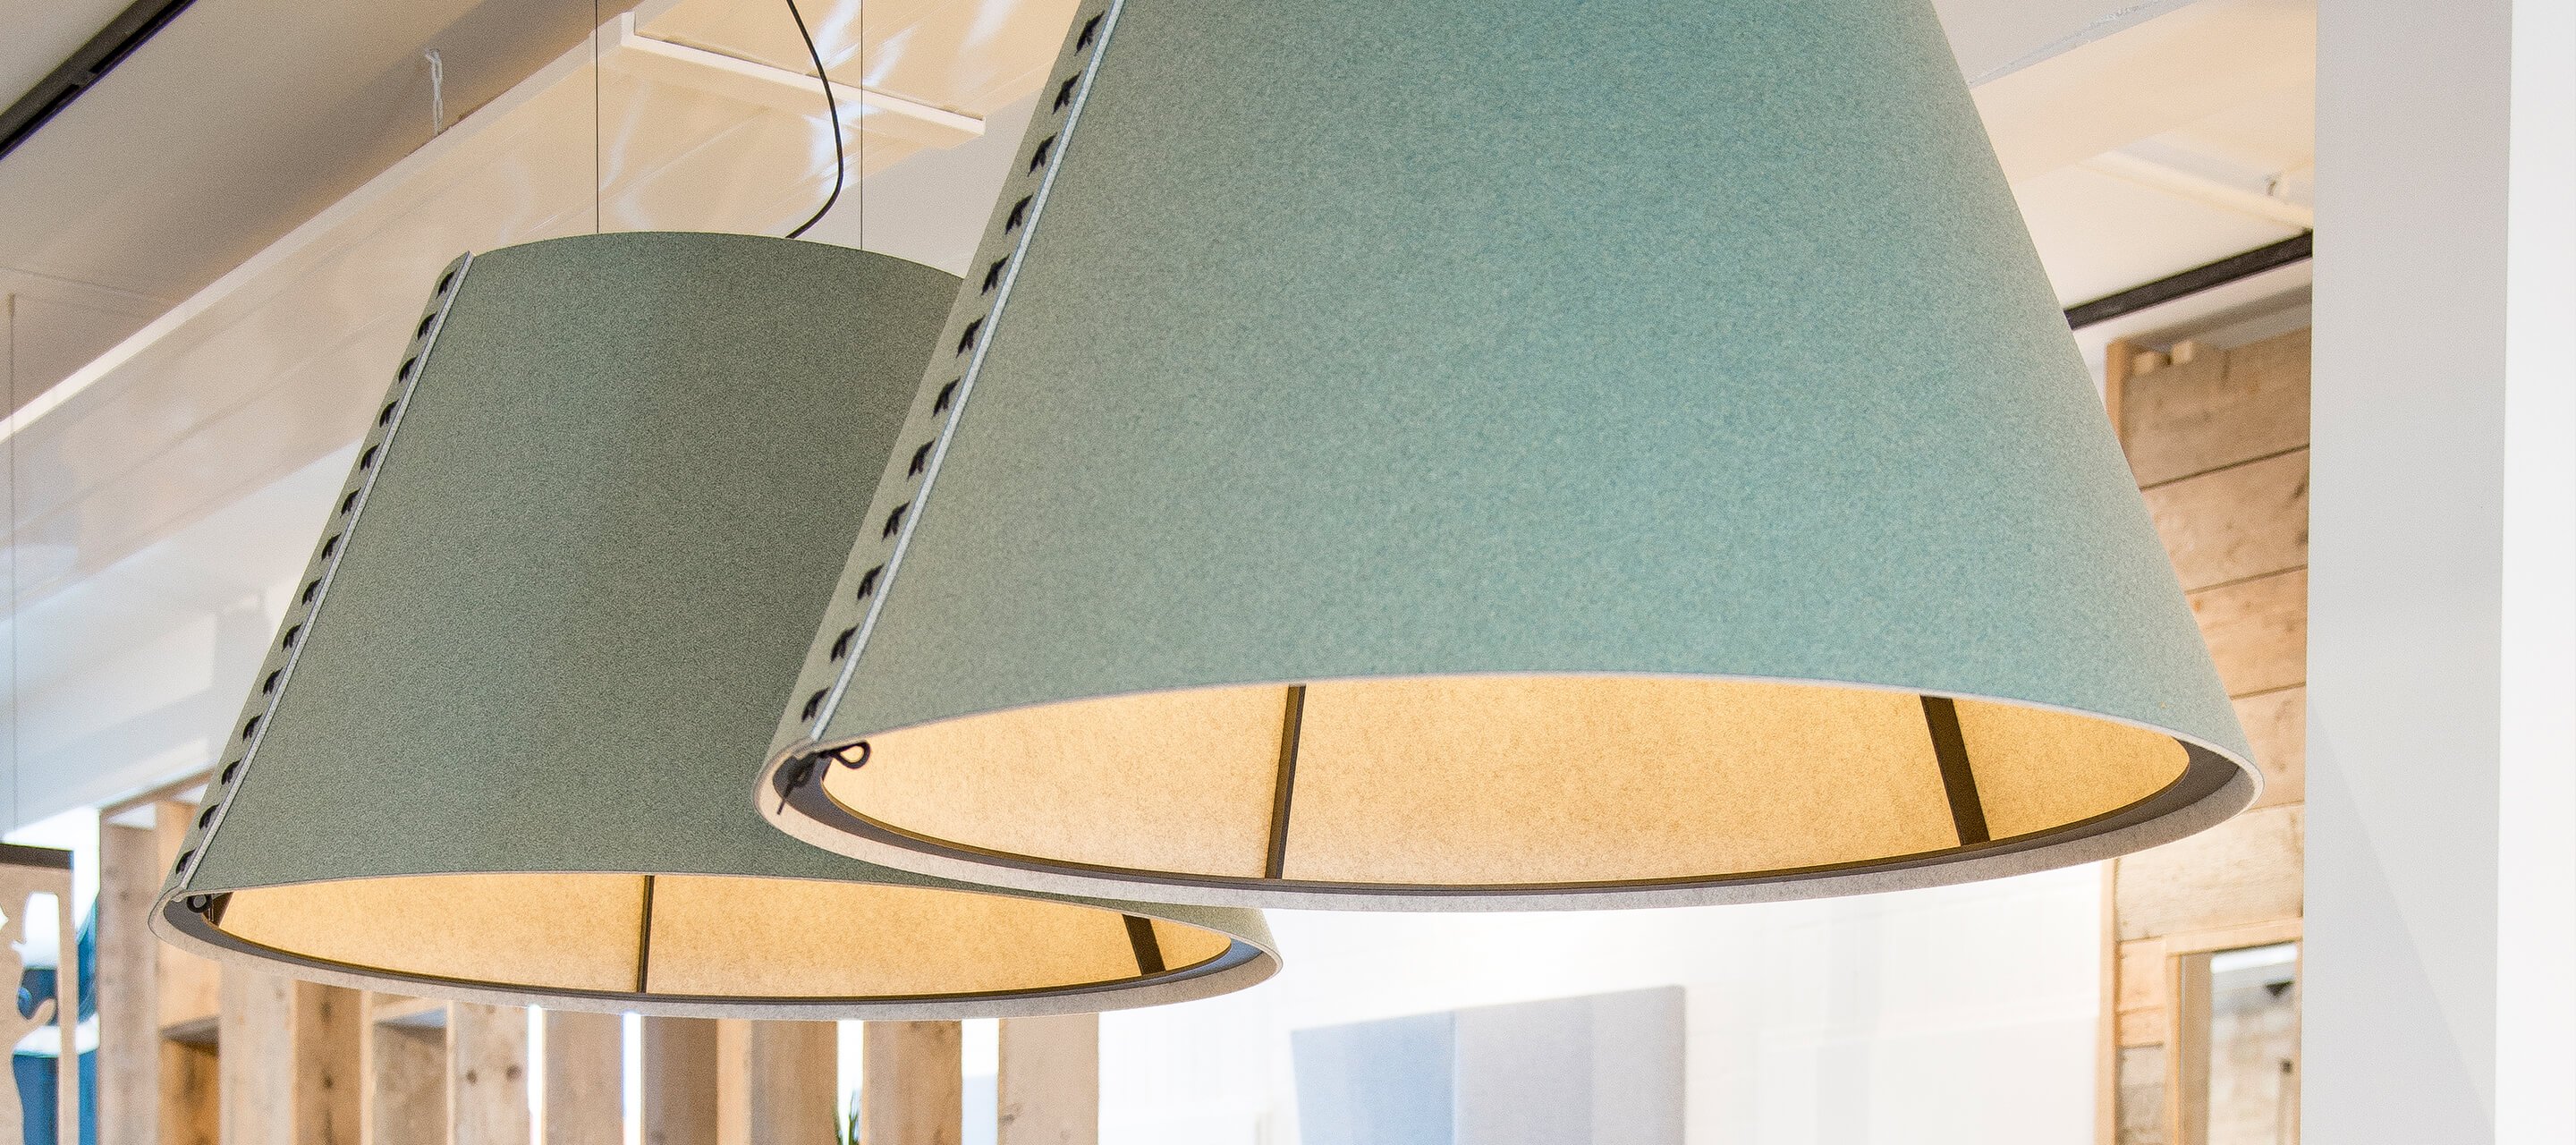 Haworth Light Design Guide showing lamps hanging from a ceiling above an office table/